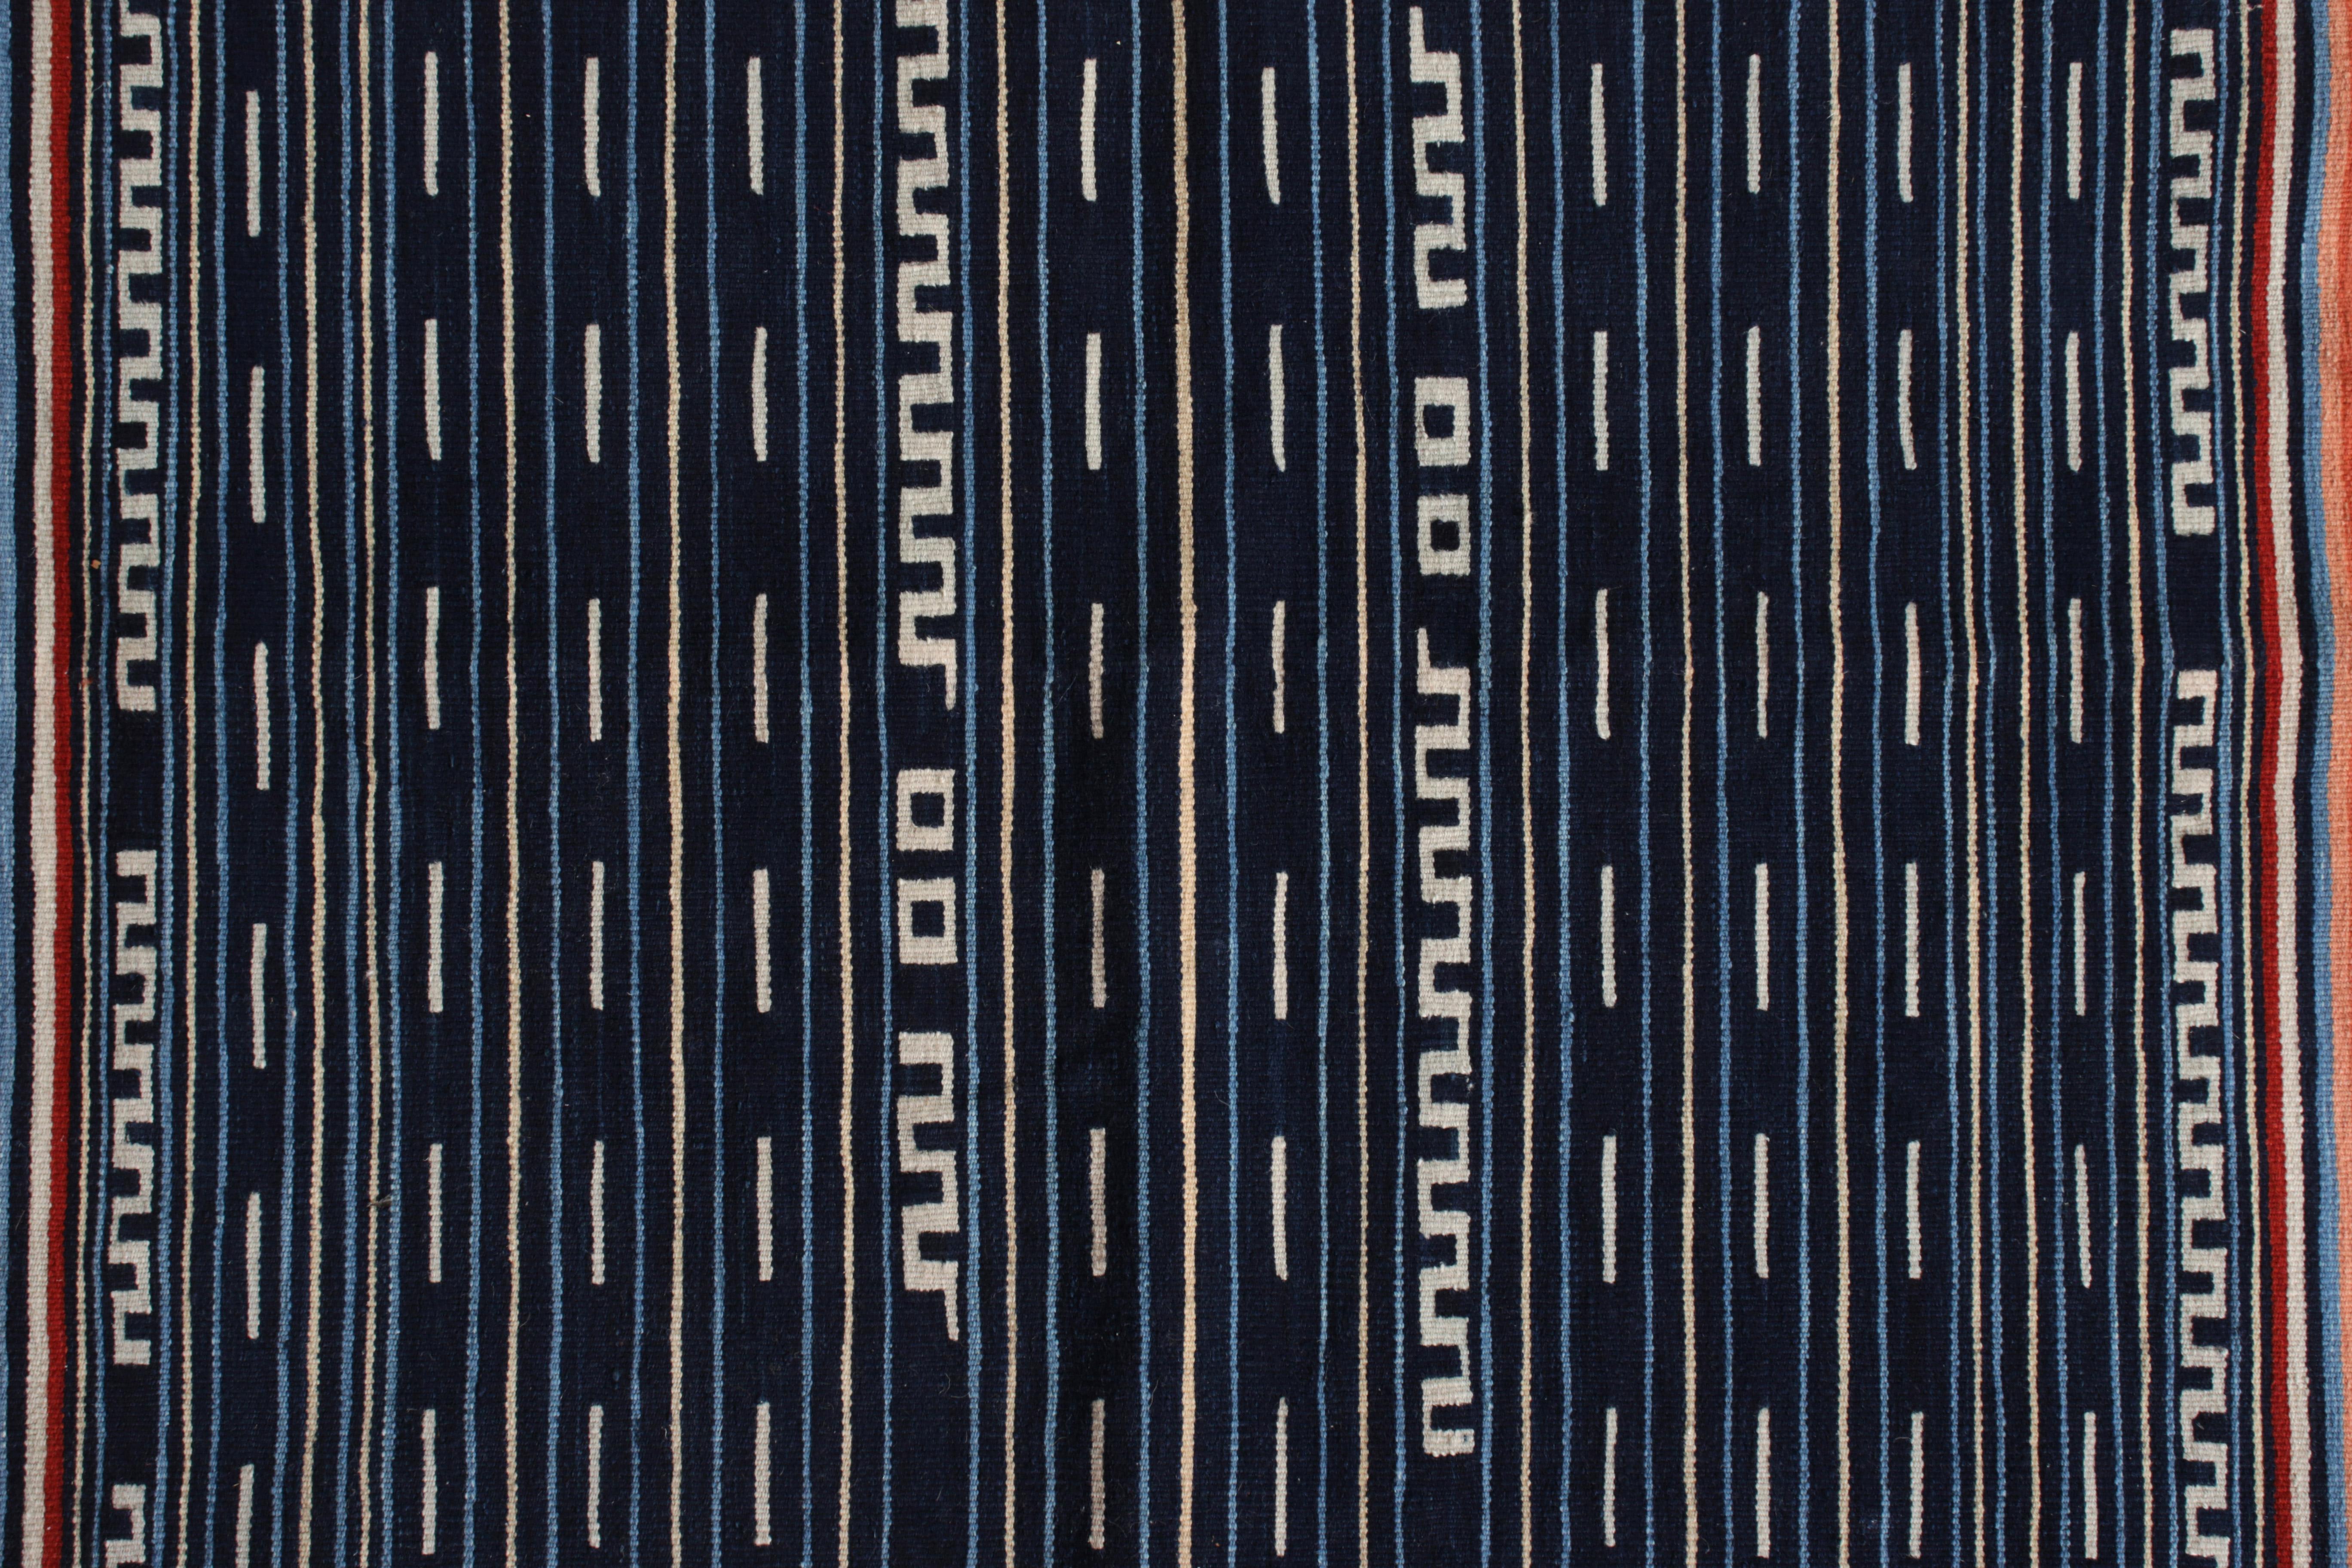 Hand-Woven Rug & Kilim's Modern Flat-Weave Rug in Blue and Red Striped Kilim Rug Design For Sale